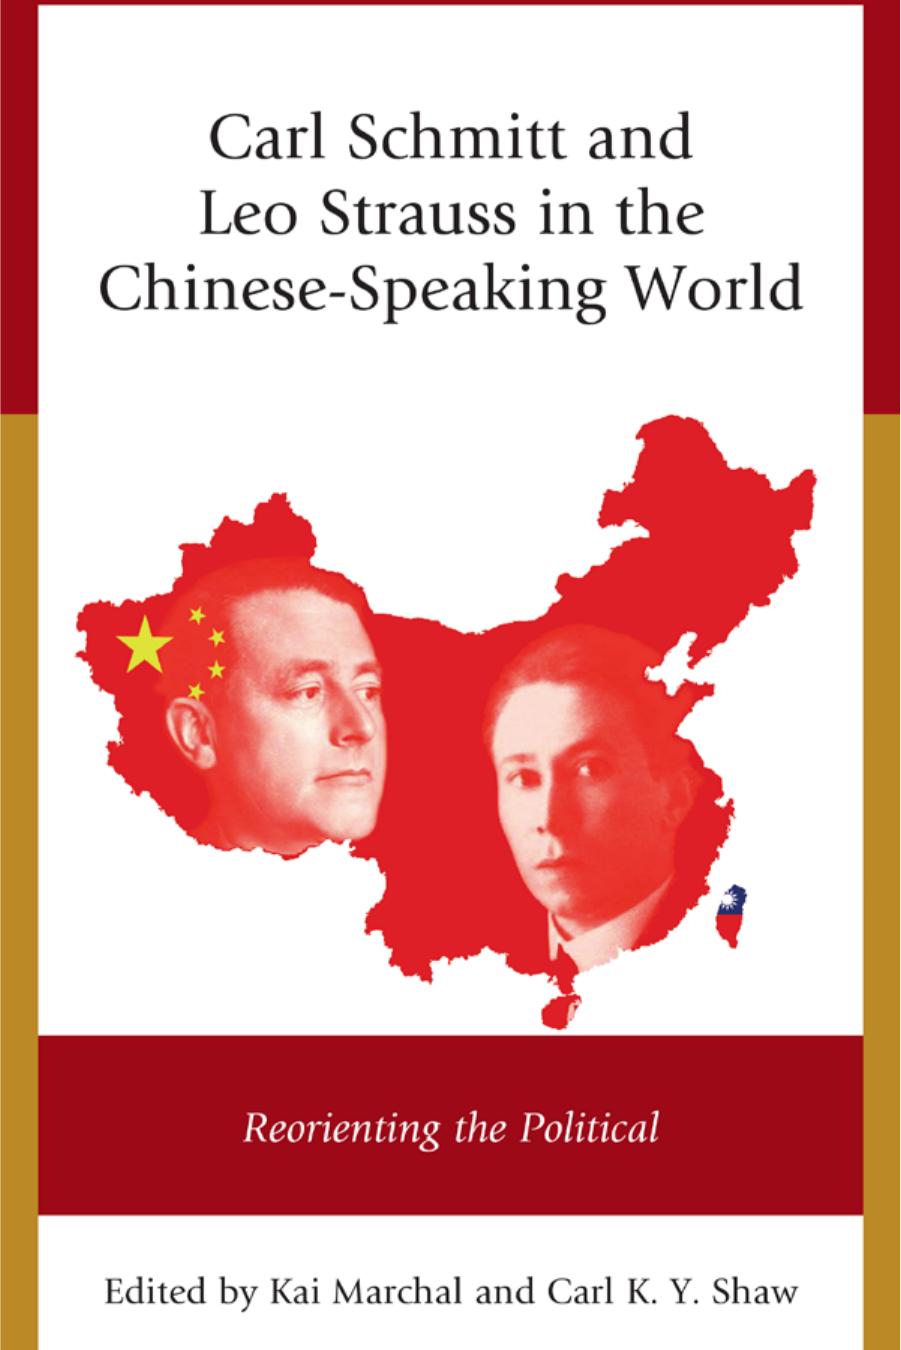 (eBook PDF)Carl Schmitt and Leo Strauss in the Chinese-Speaking World by Kai Marchal,Carl K. Y. Shaw